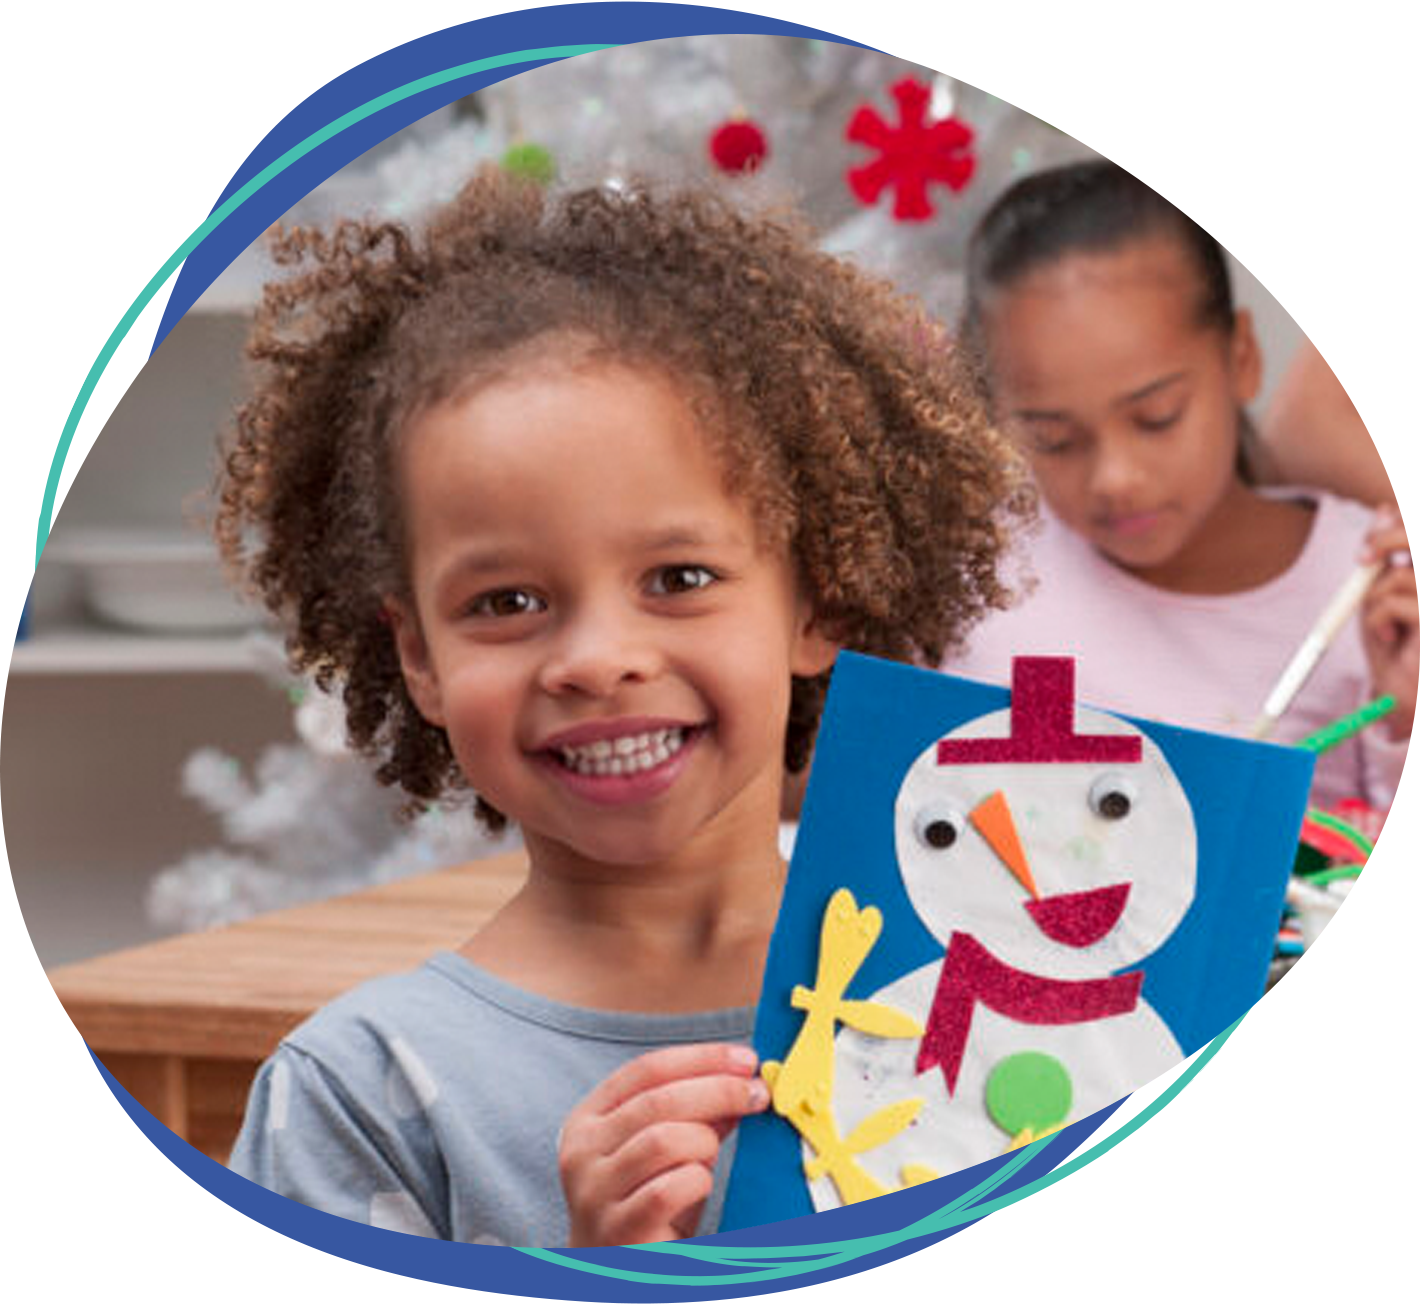 Festive and Fun Ideas to Keep Kids Learning!